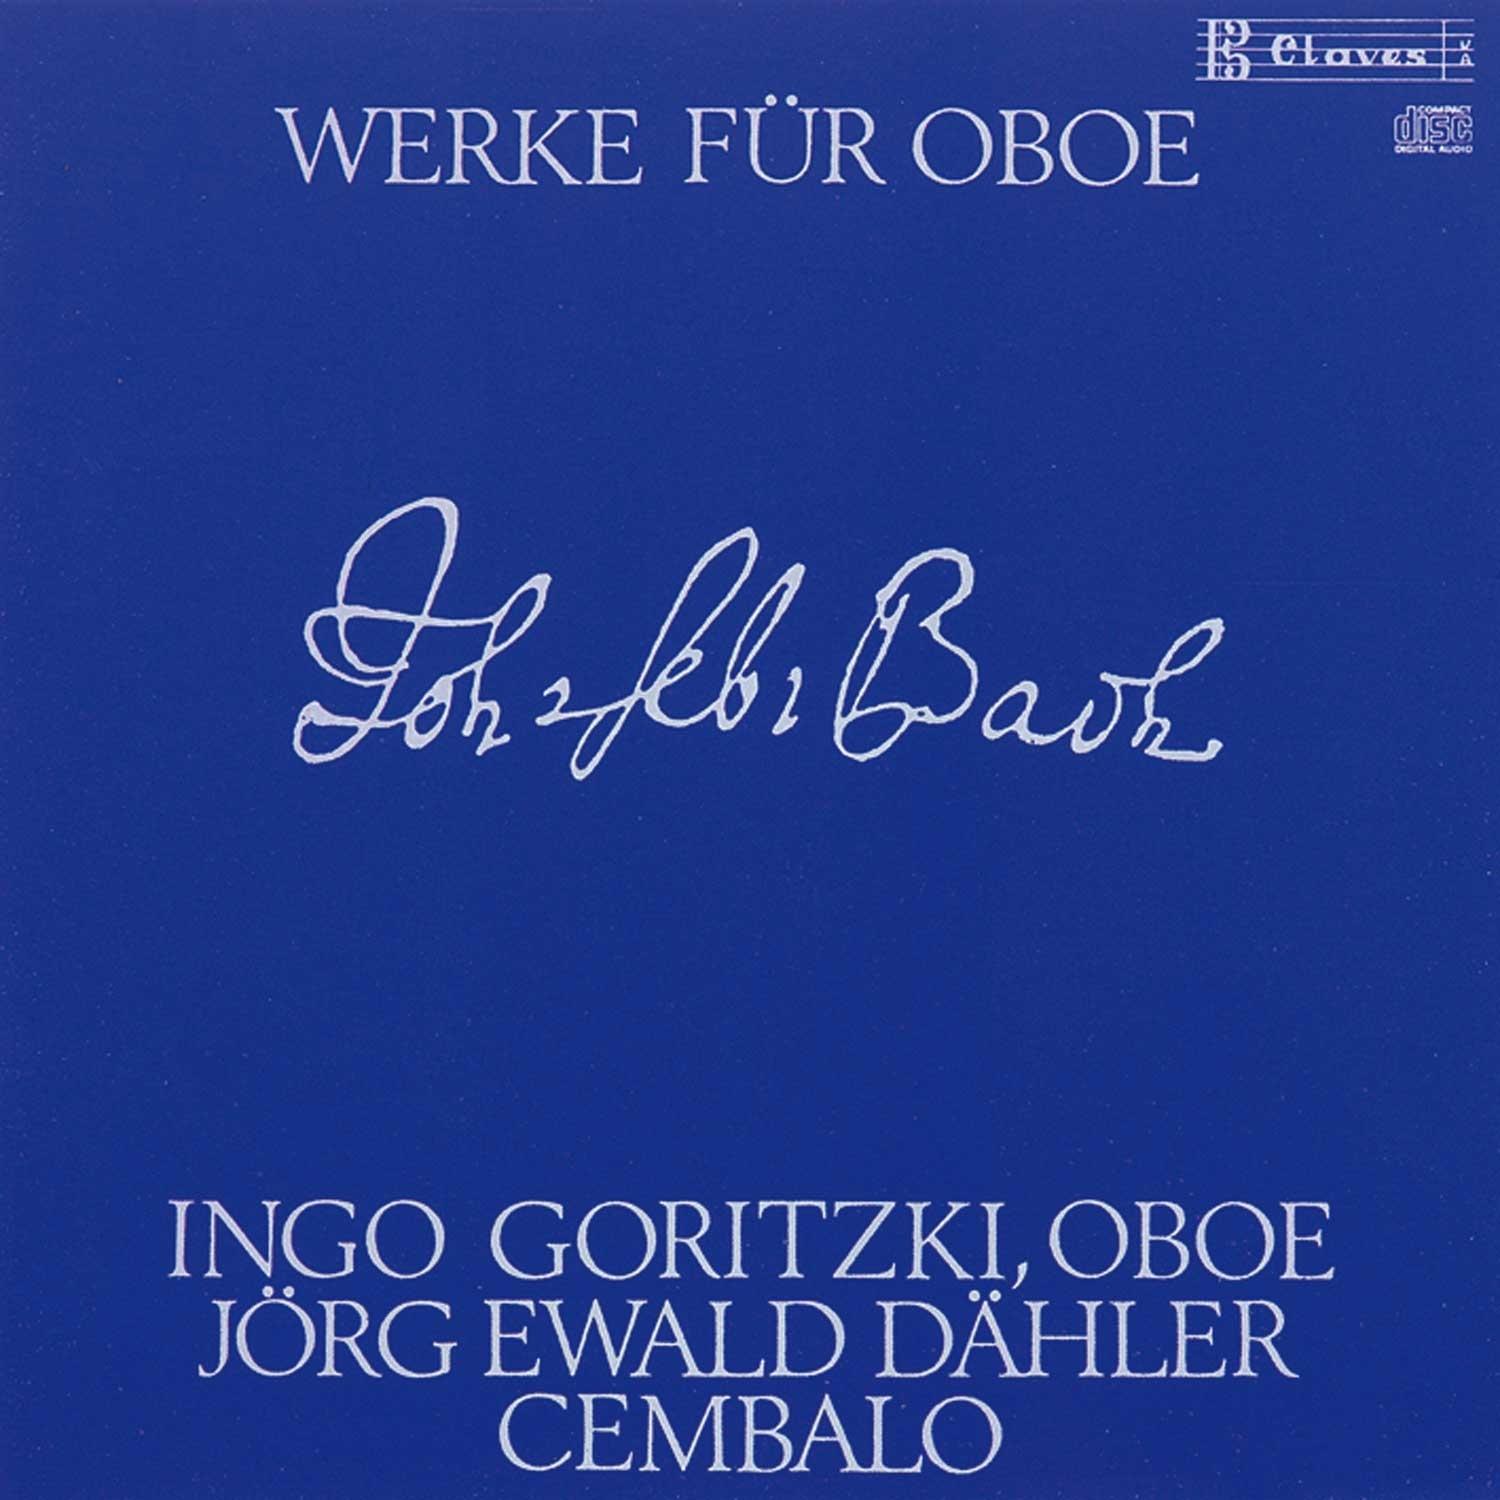 J. S. Bach : Works for Oboe and Harpsichord